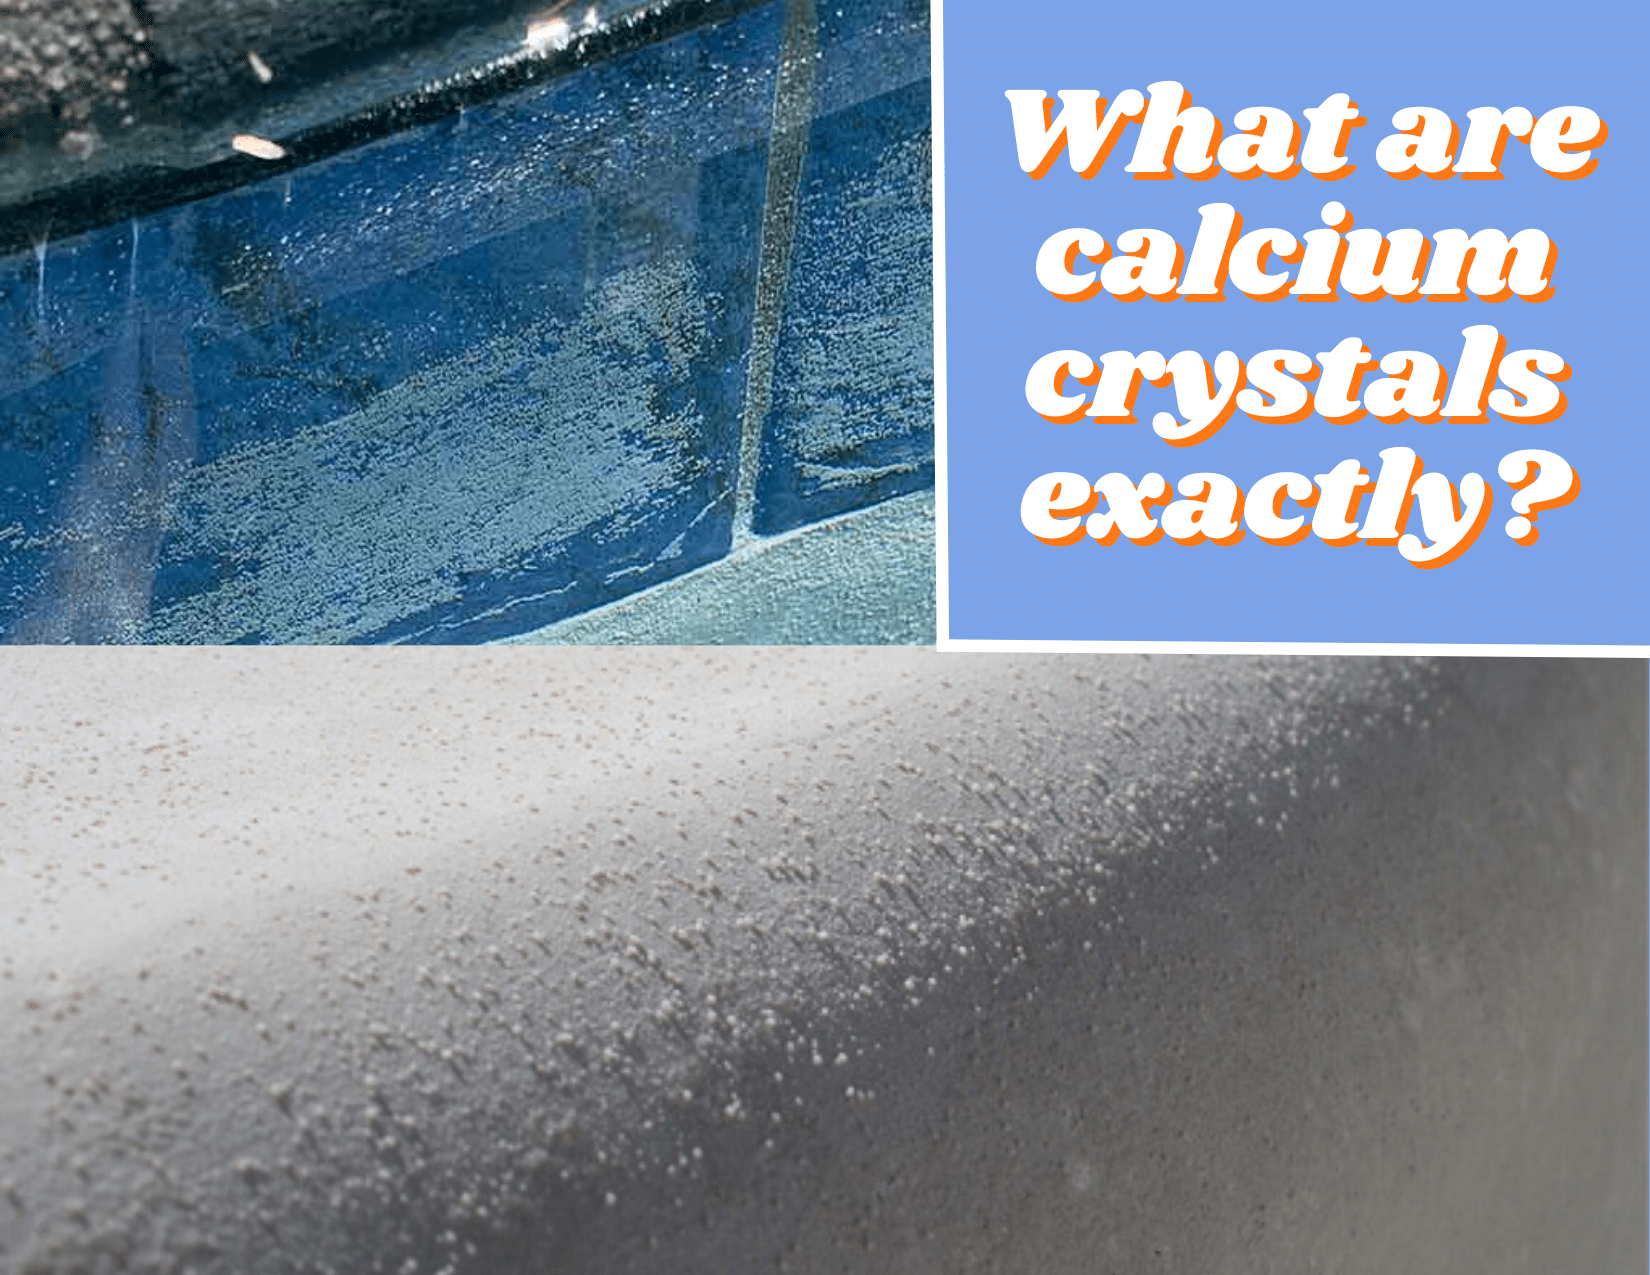 What are Calcium Cystals Exactly?